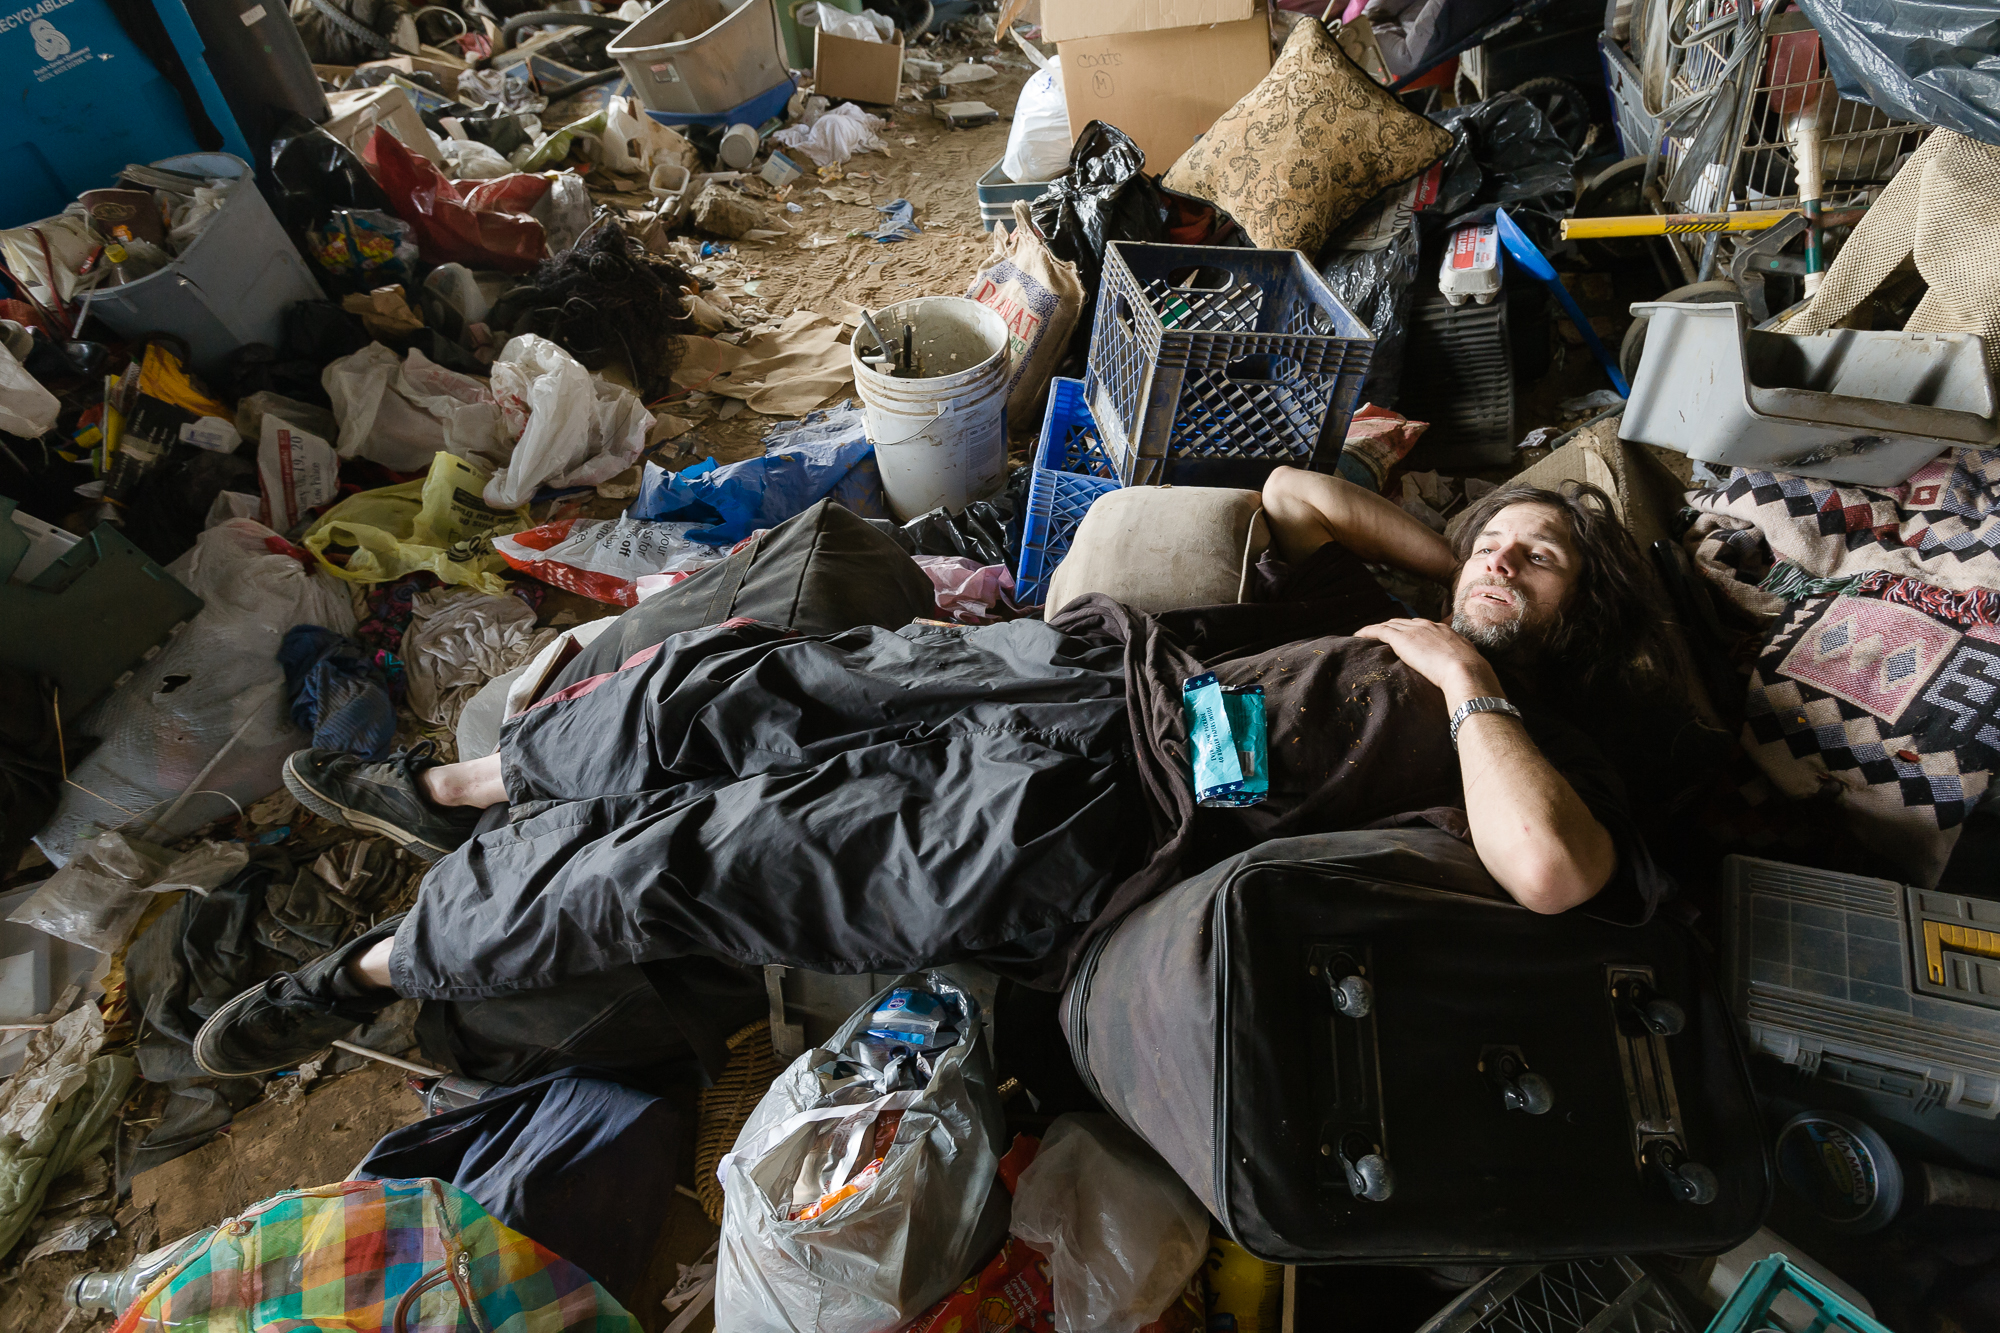  After a hard day of scrapping, Steve, lays down in a rat's nest of detritus back at camp to ponder his situation. New to the camp he lives in a make shift tent amongst a pile of garbage. 